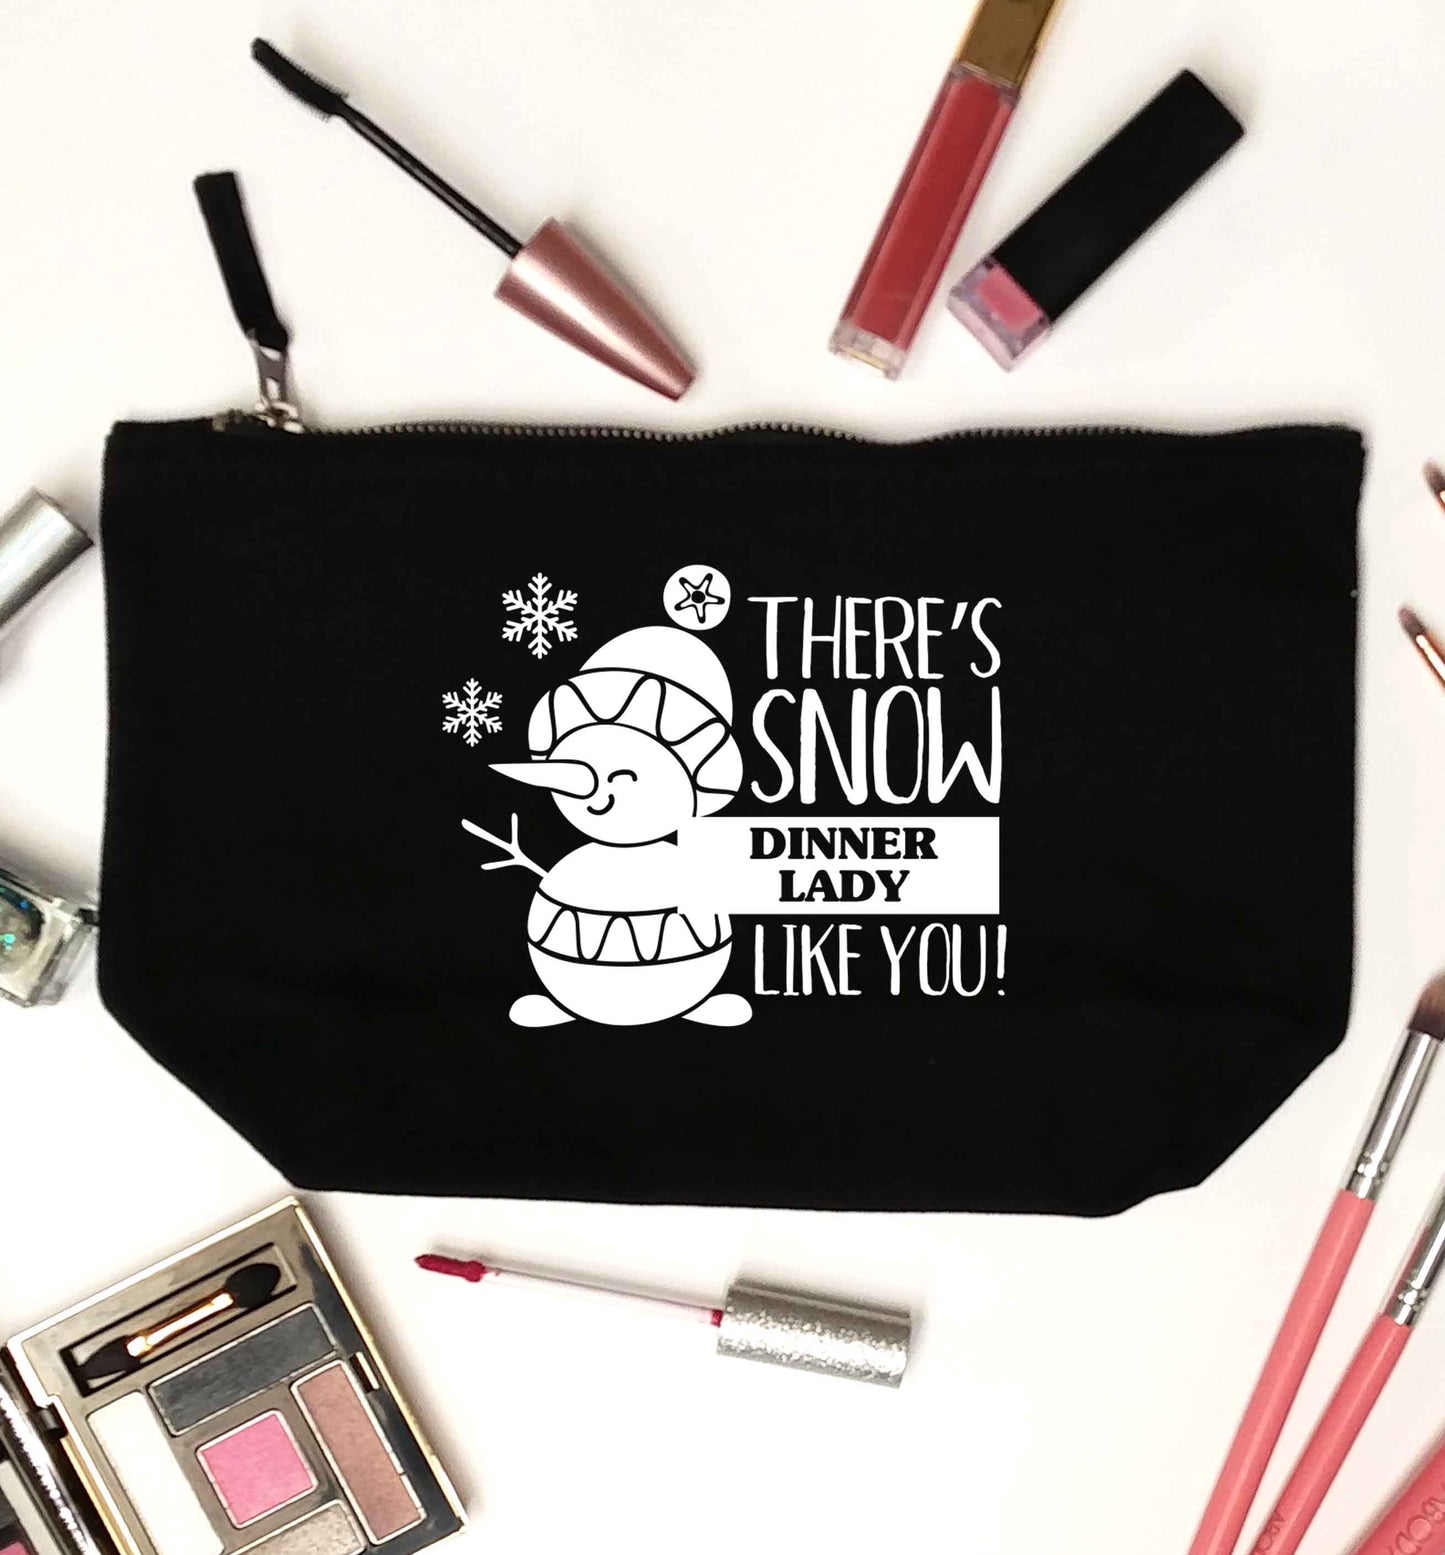 There's snow dinner lady like you black makeup bag